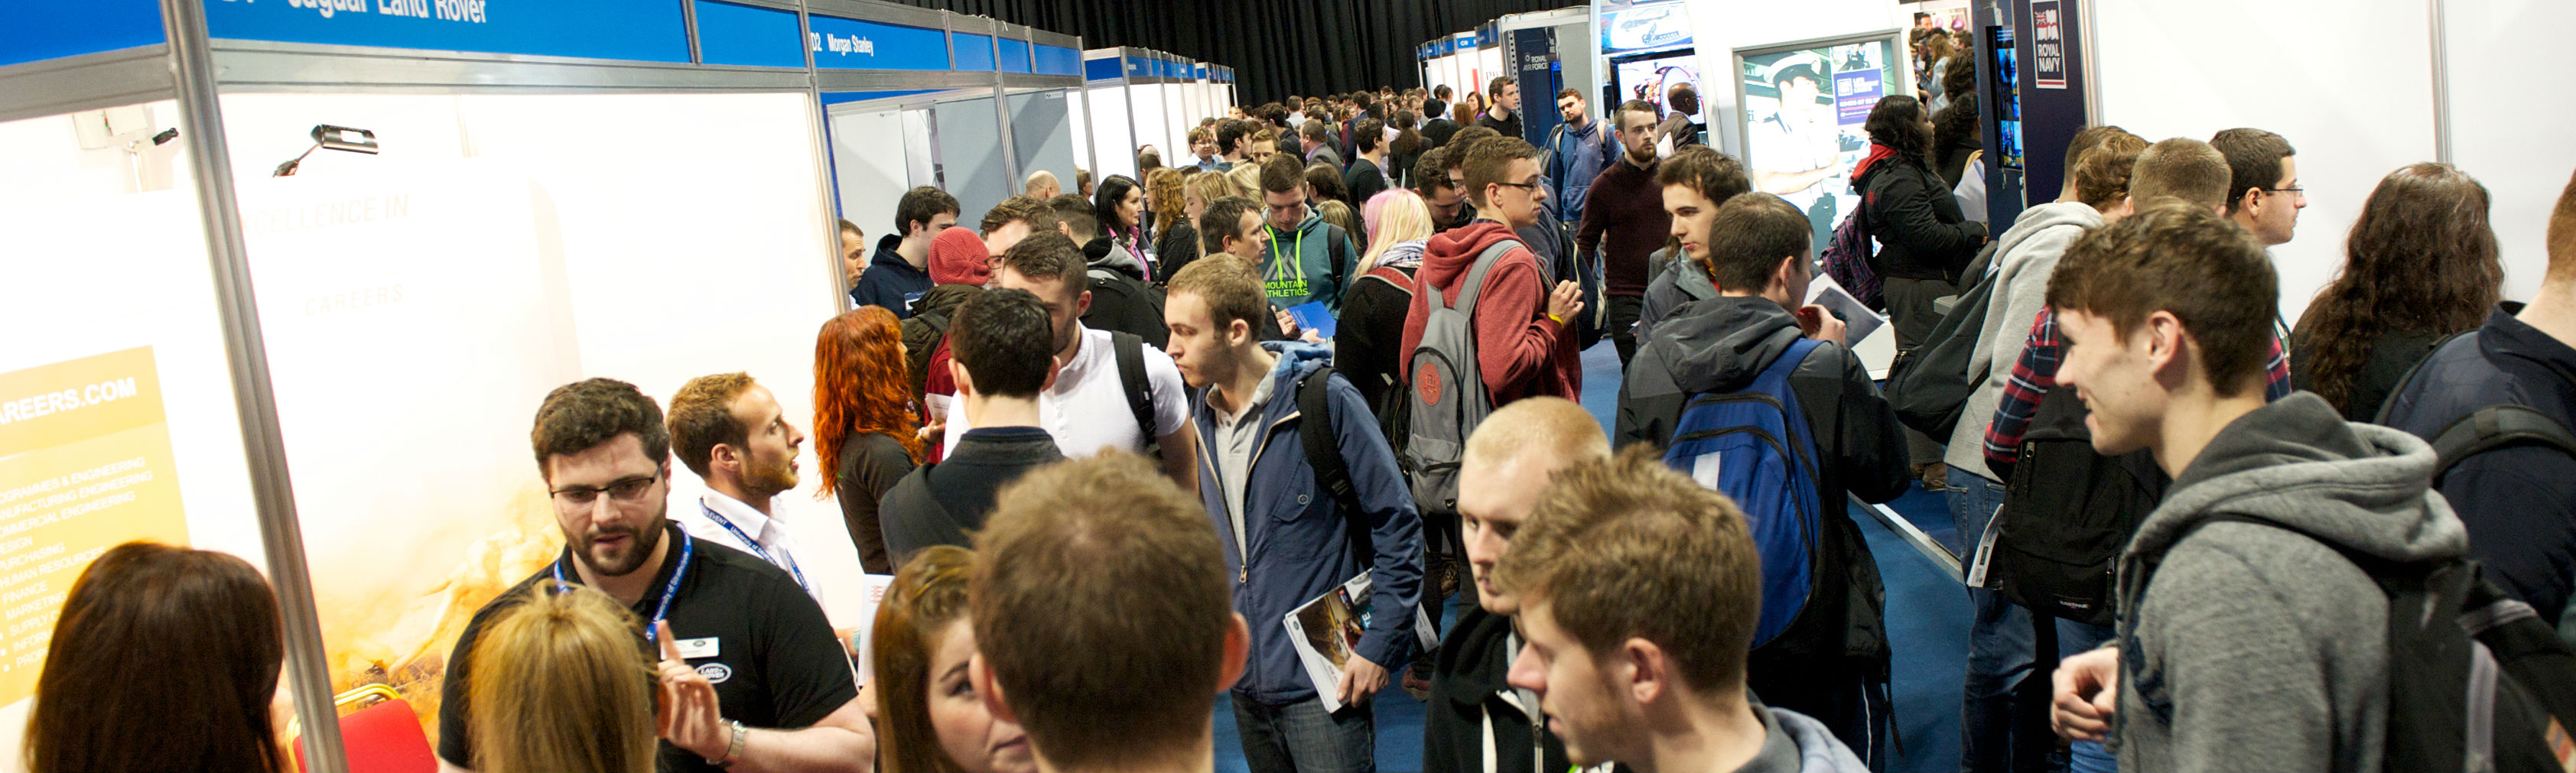 Sign up now for Graduate Fair in Glasgow